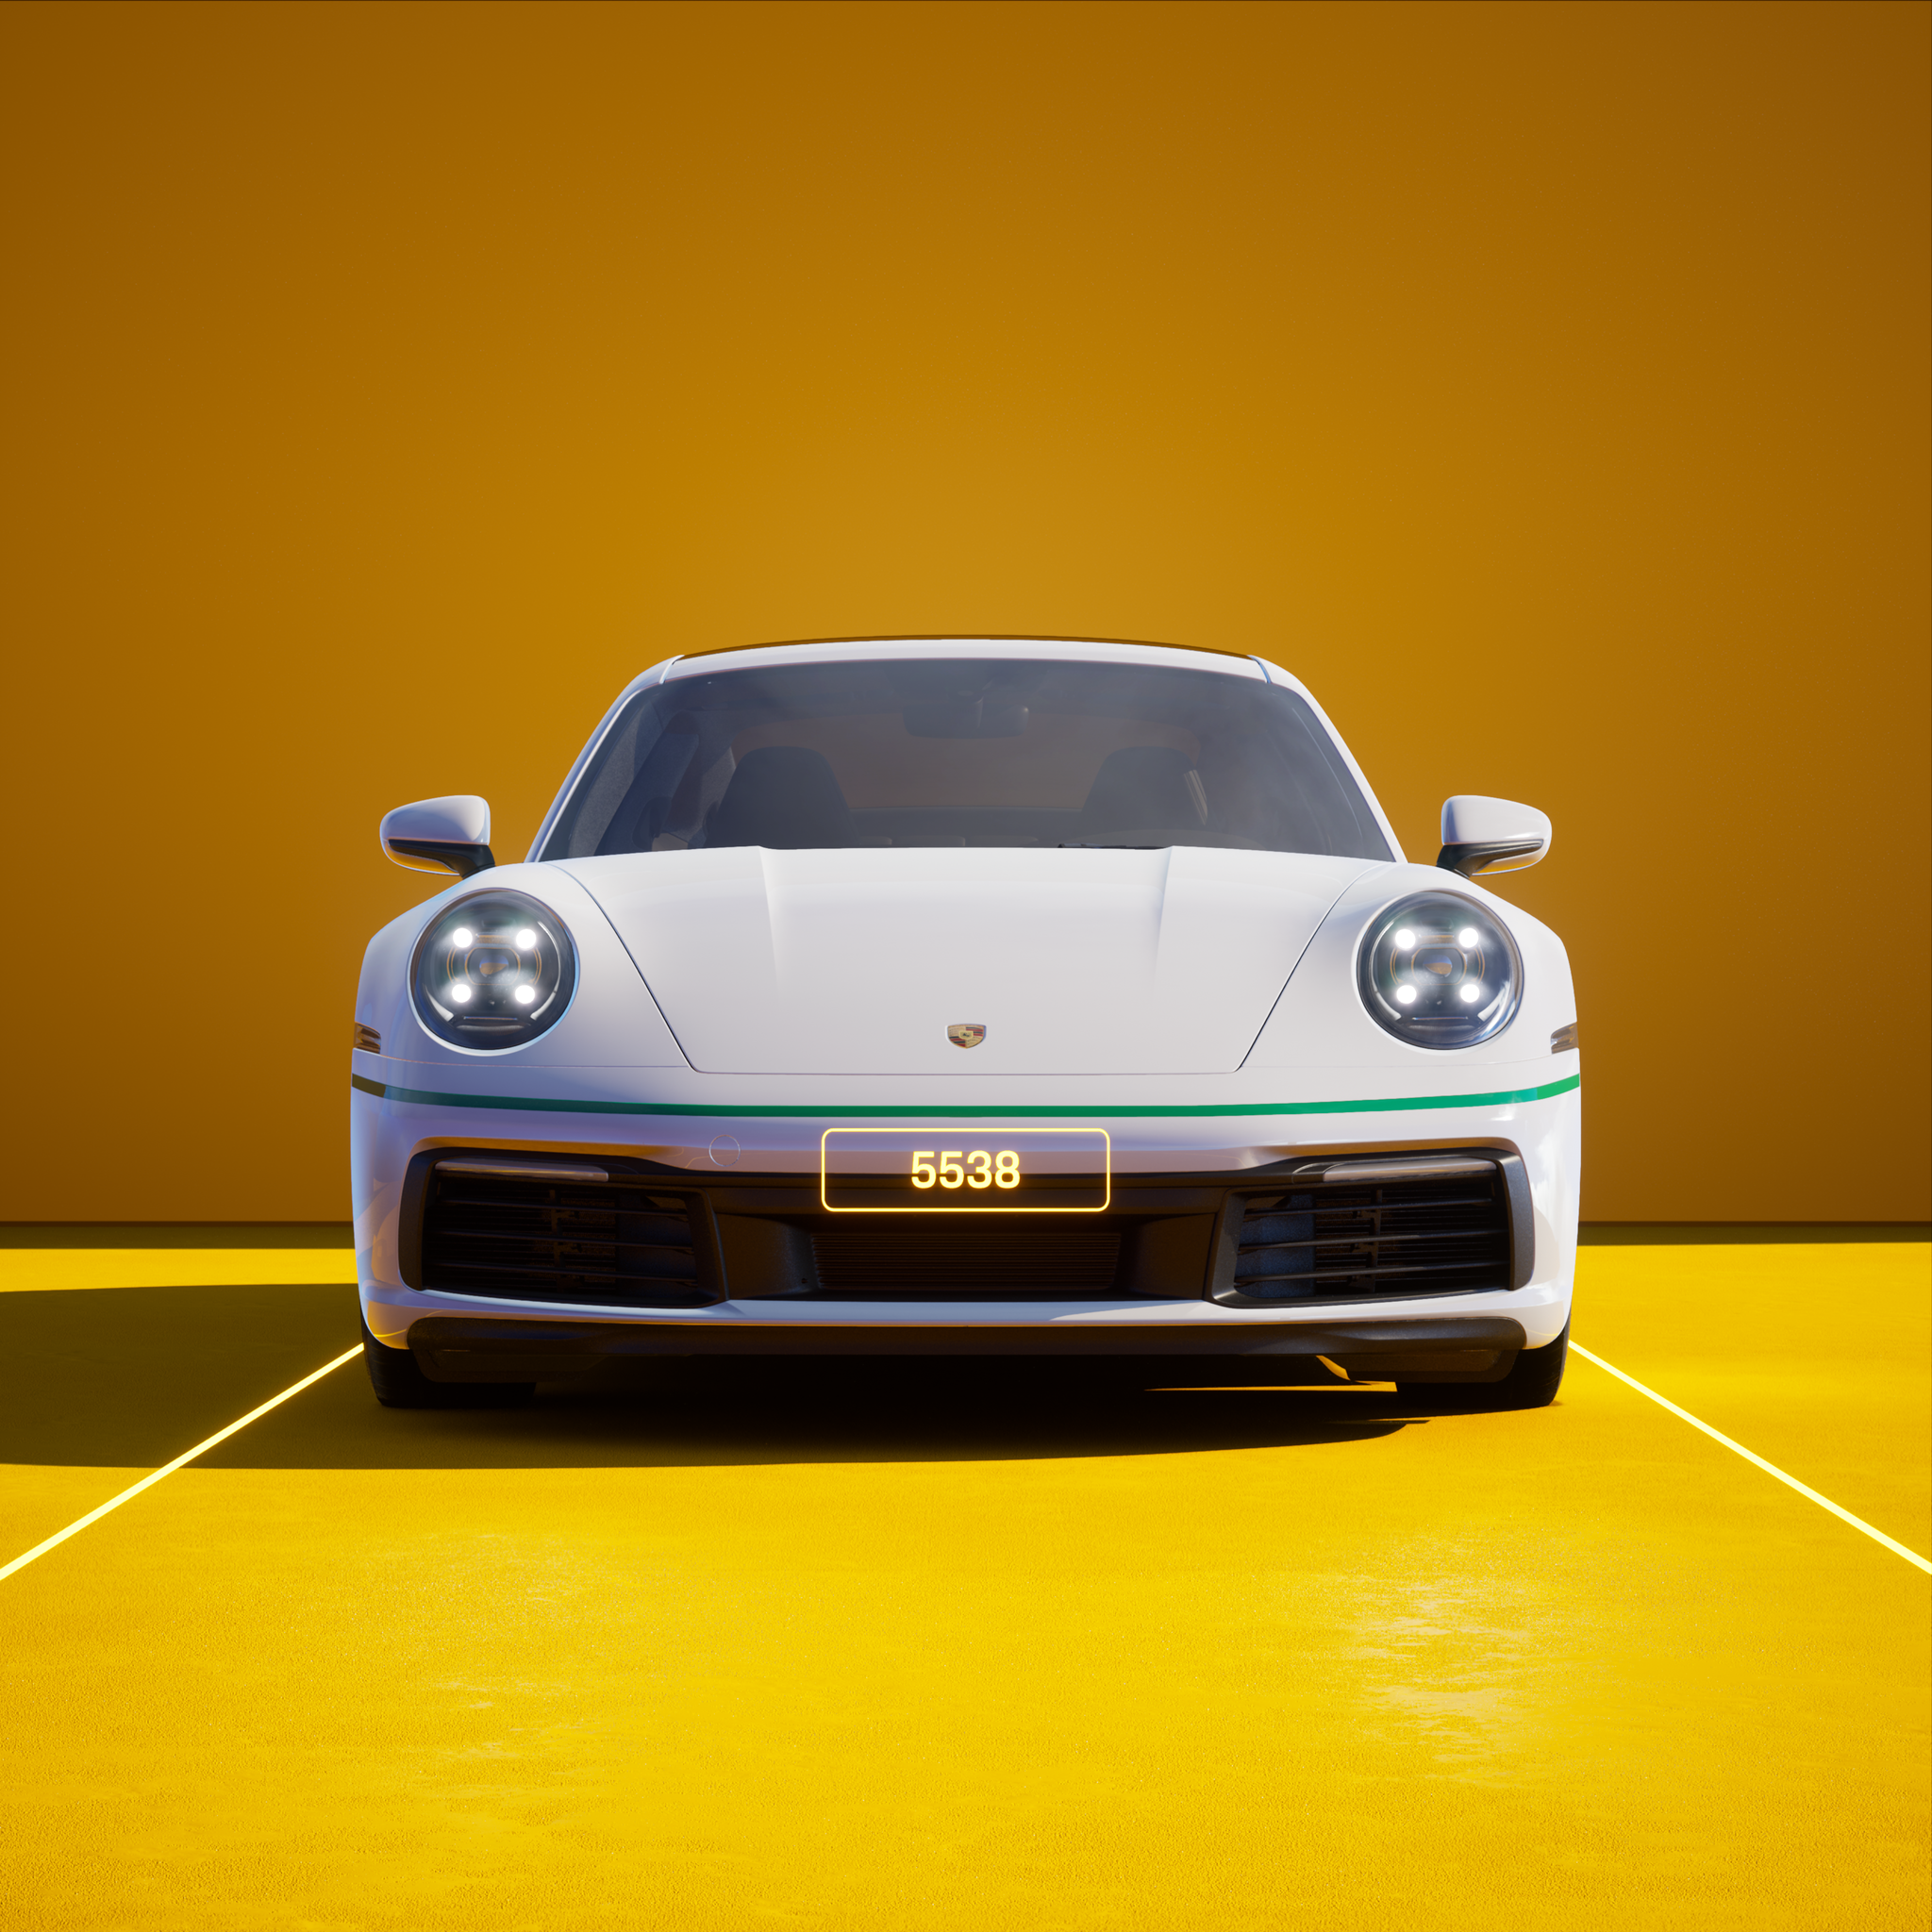 The PORSCHΞ 911 5538 image in phase